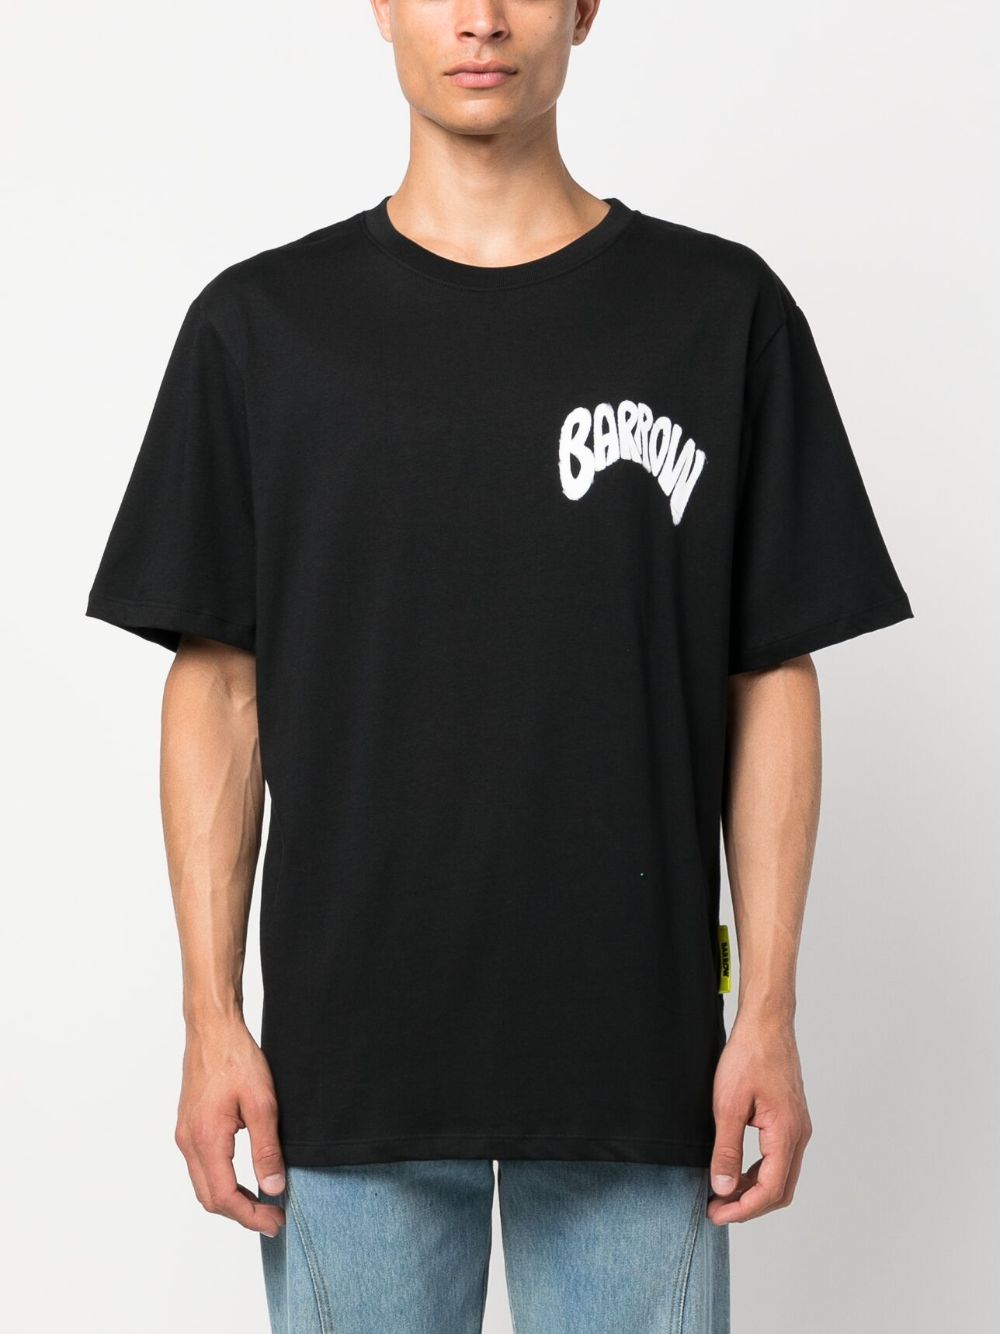 black t-shirt with wings print